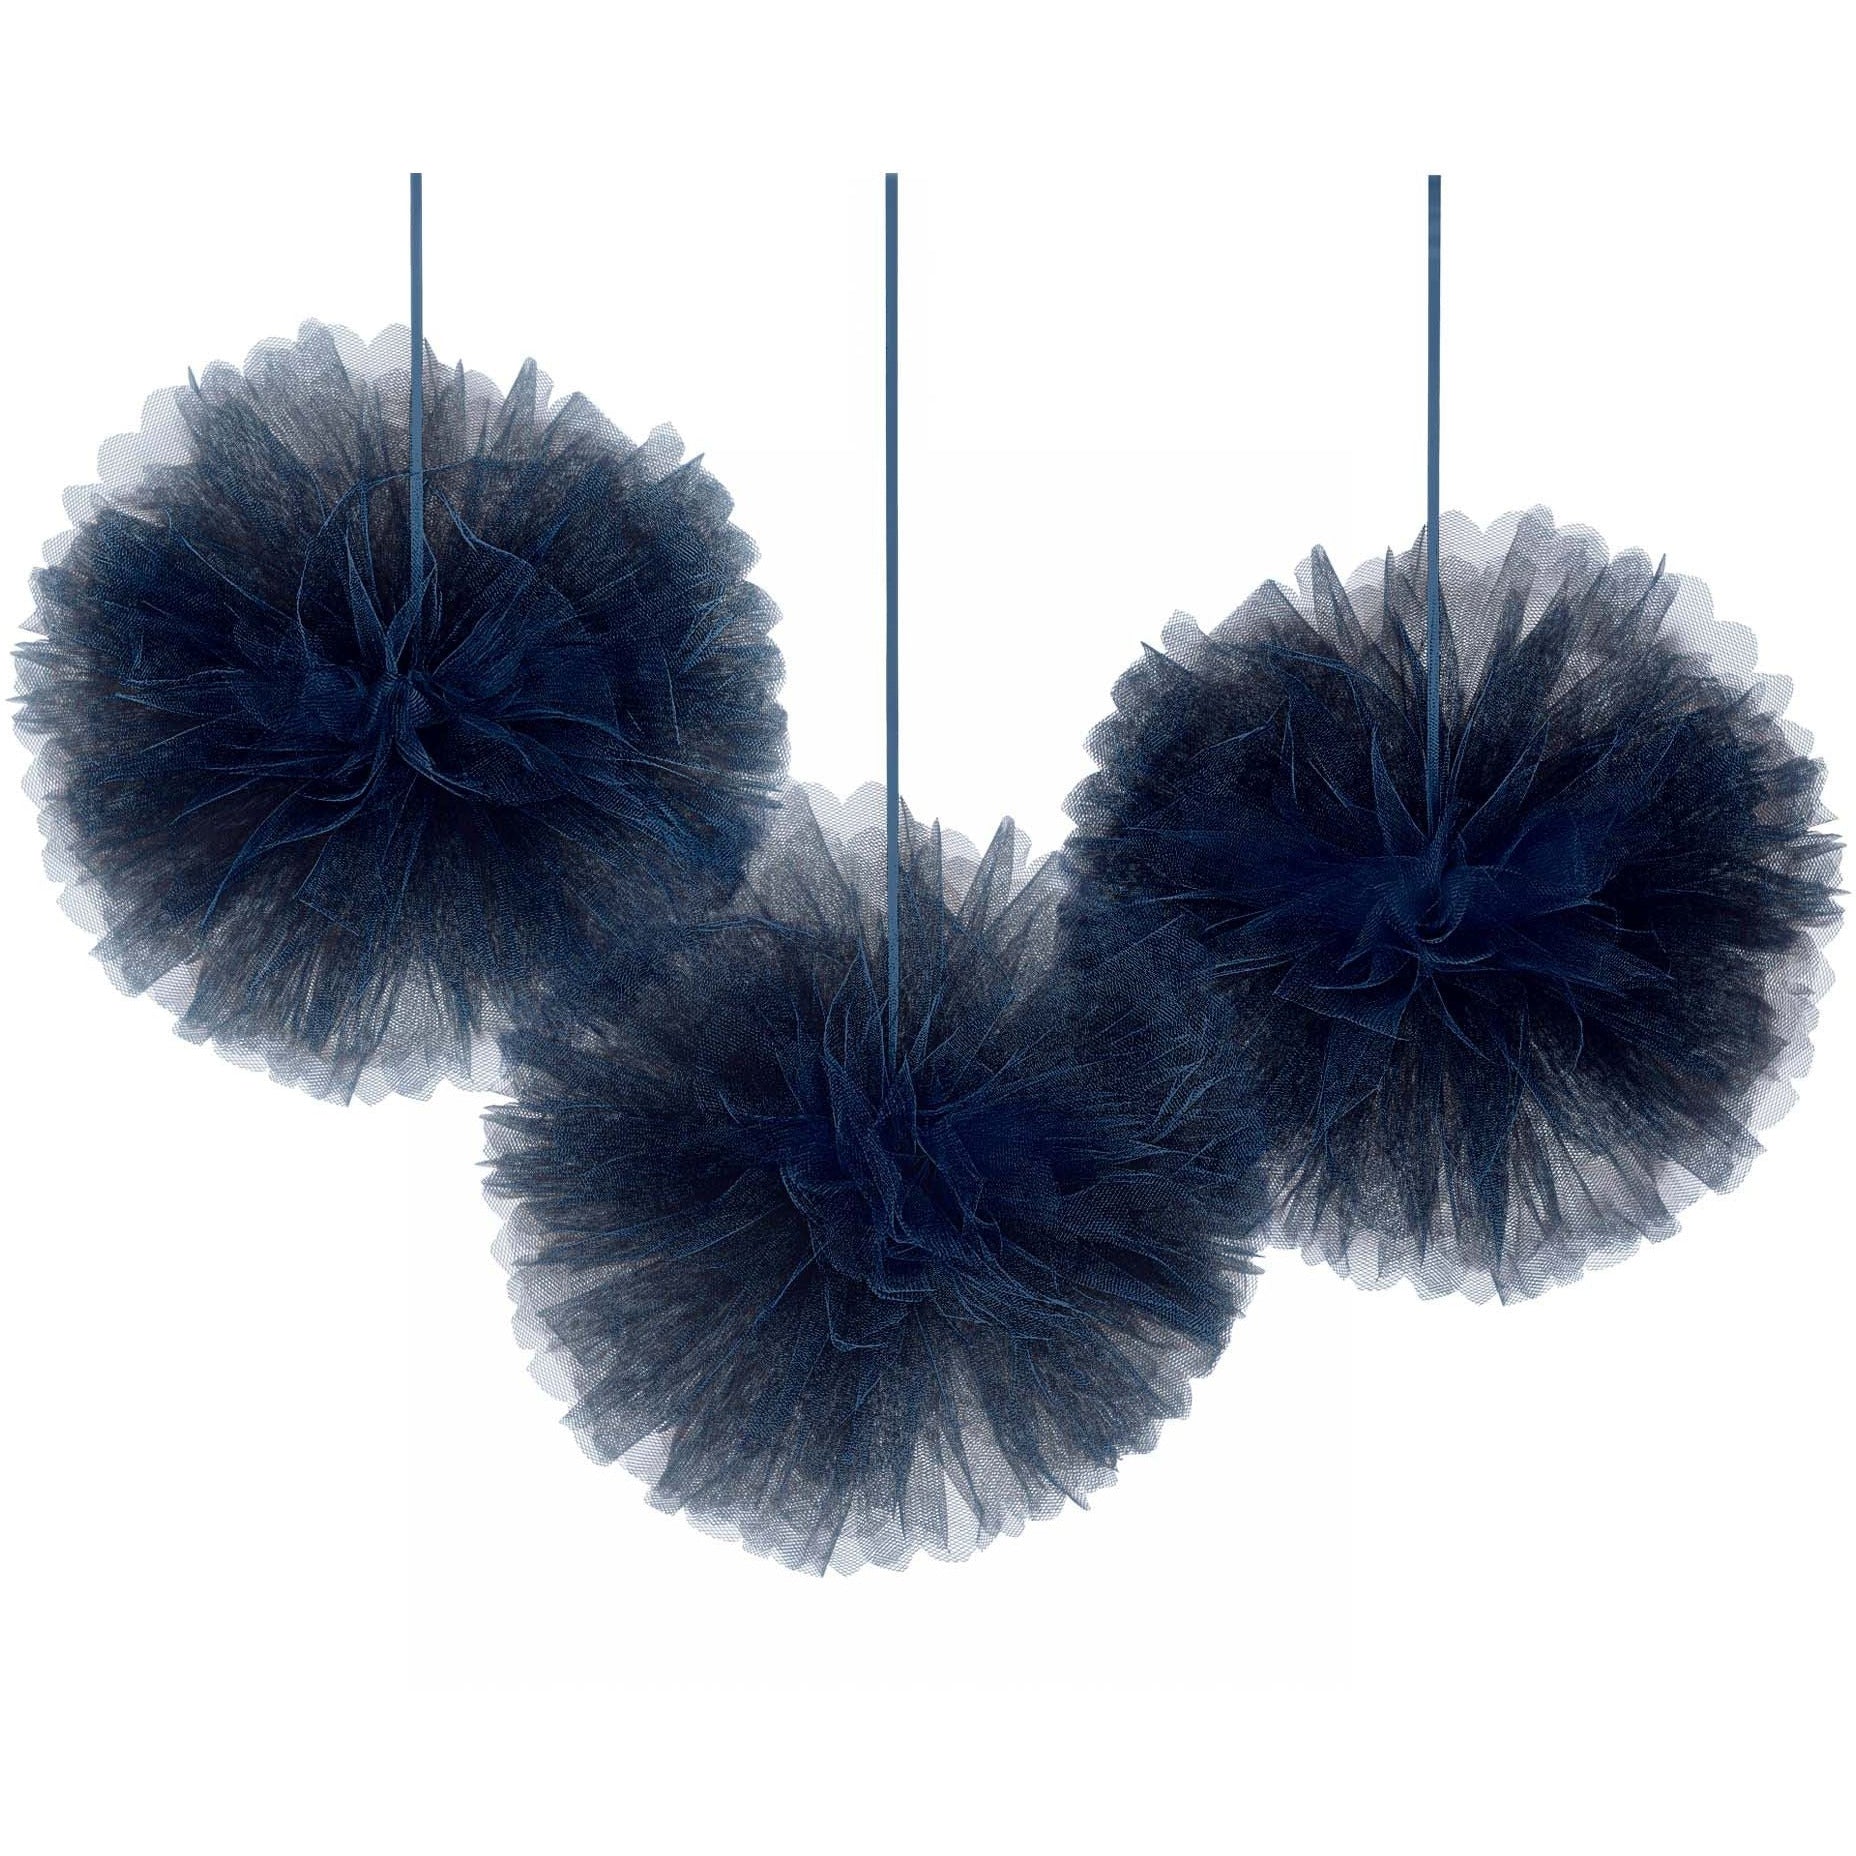 Amscan DECORATIONS Navy Bride Deluxe Tulle Fluffy Decorations - Tulle Navy